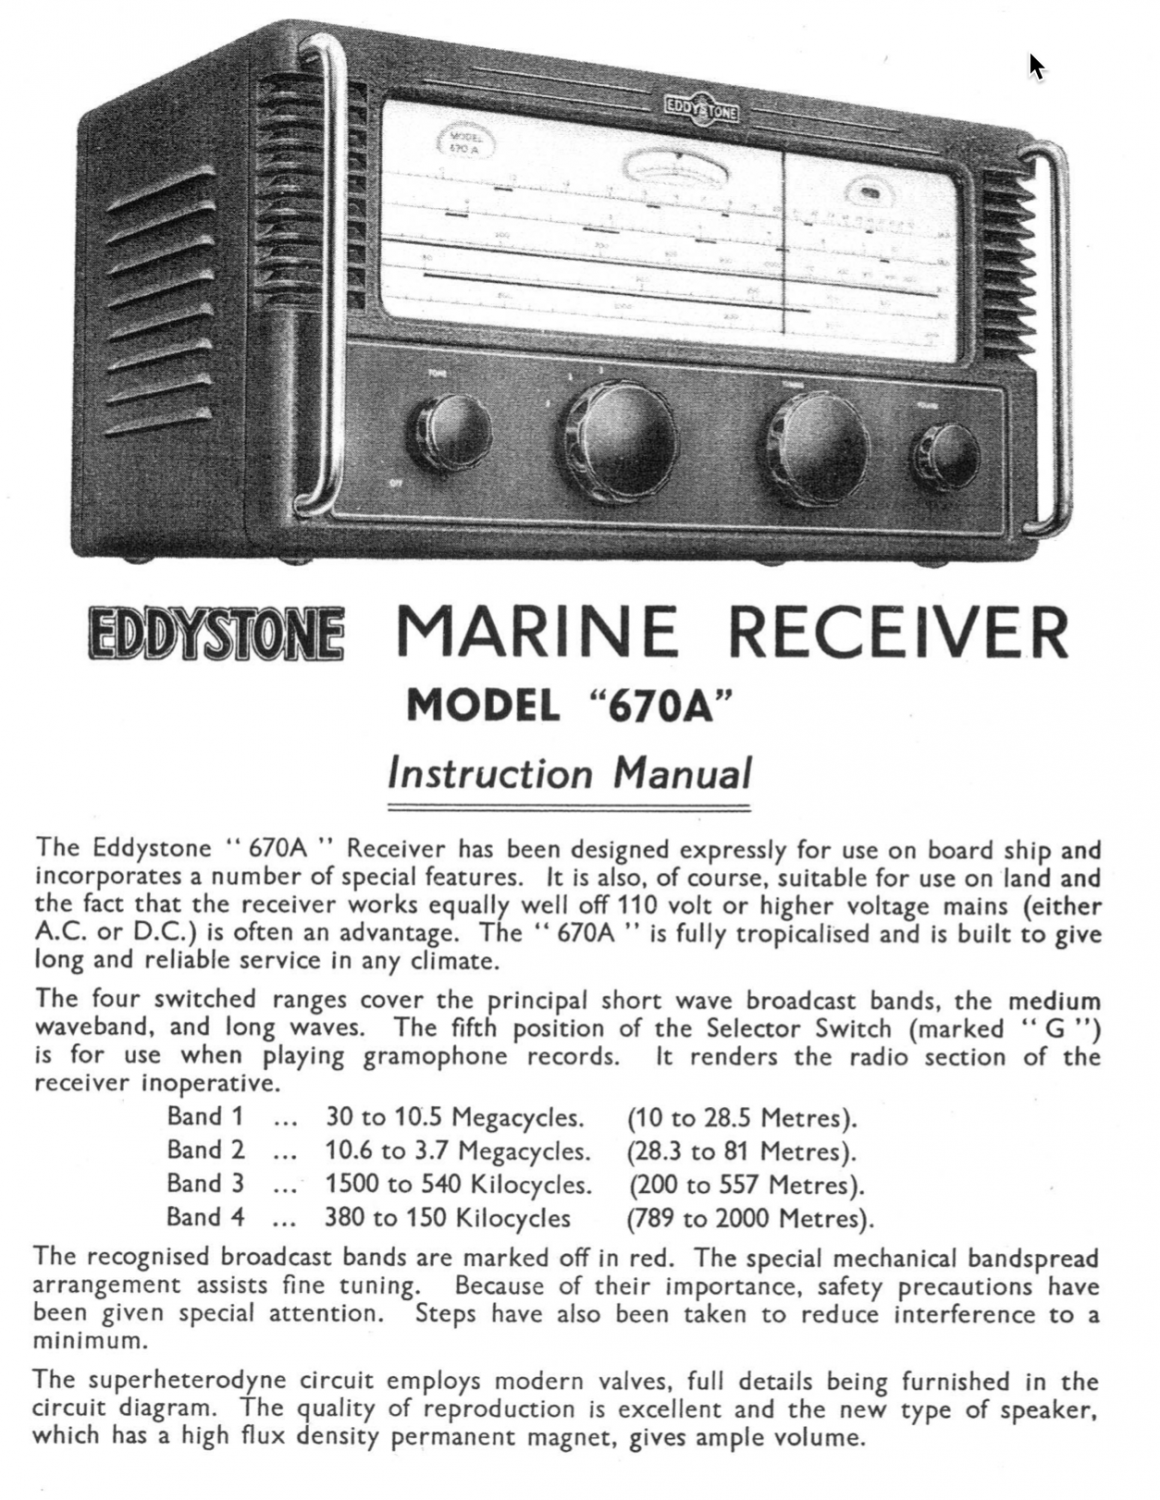 Eddystone Type 670A Communications Receiver - Instruction Manual 02